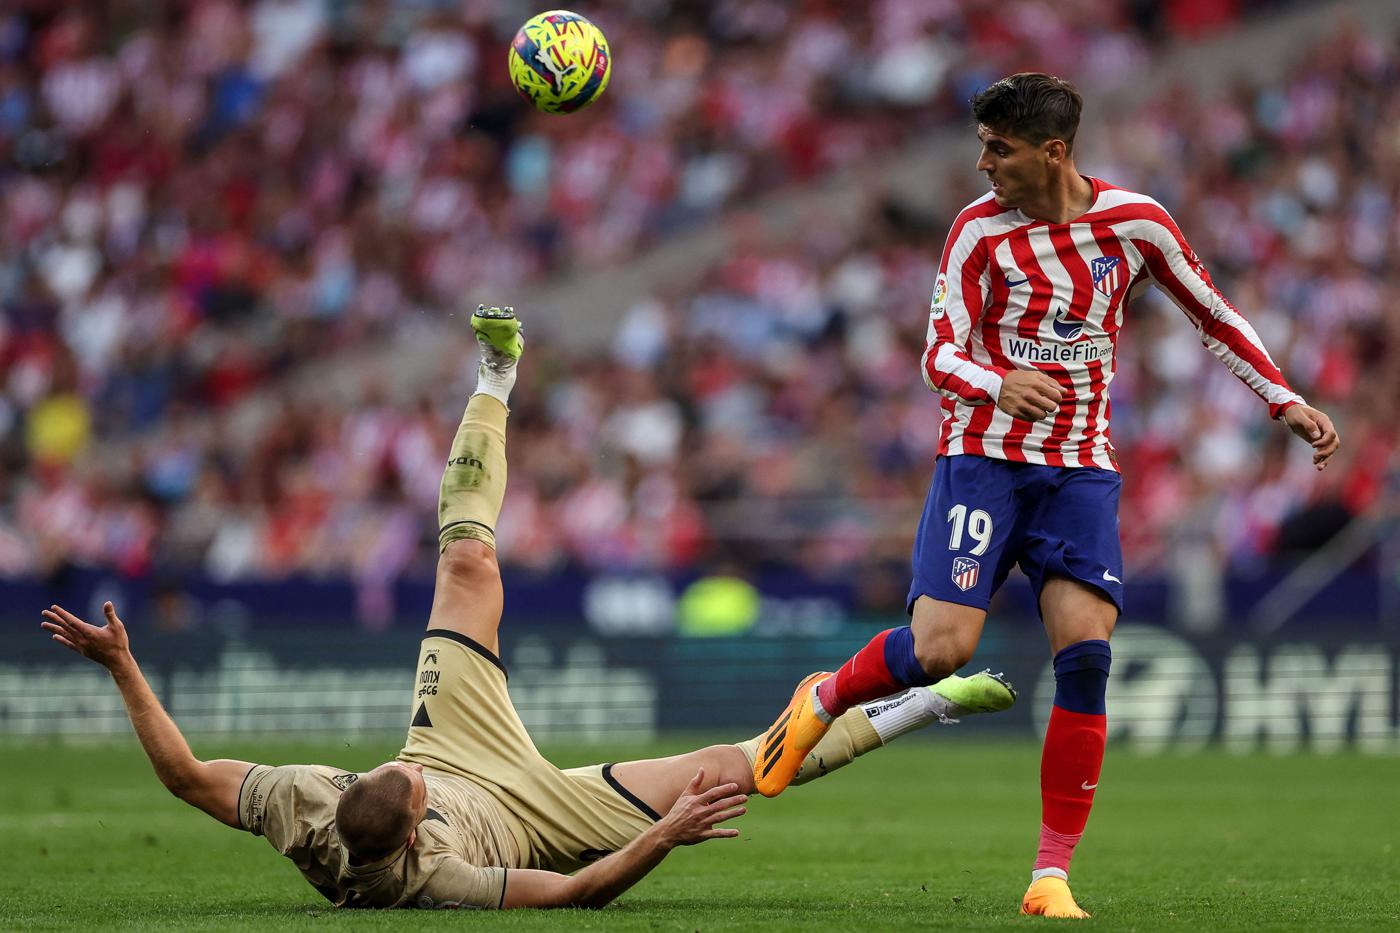 Atletico - Almeria - 2:1. Spain Championship, 29th round. Overview of the match,